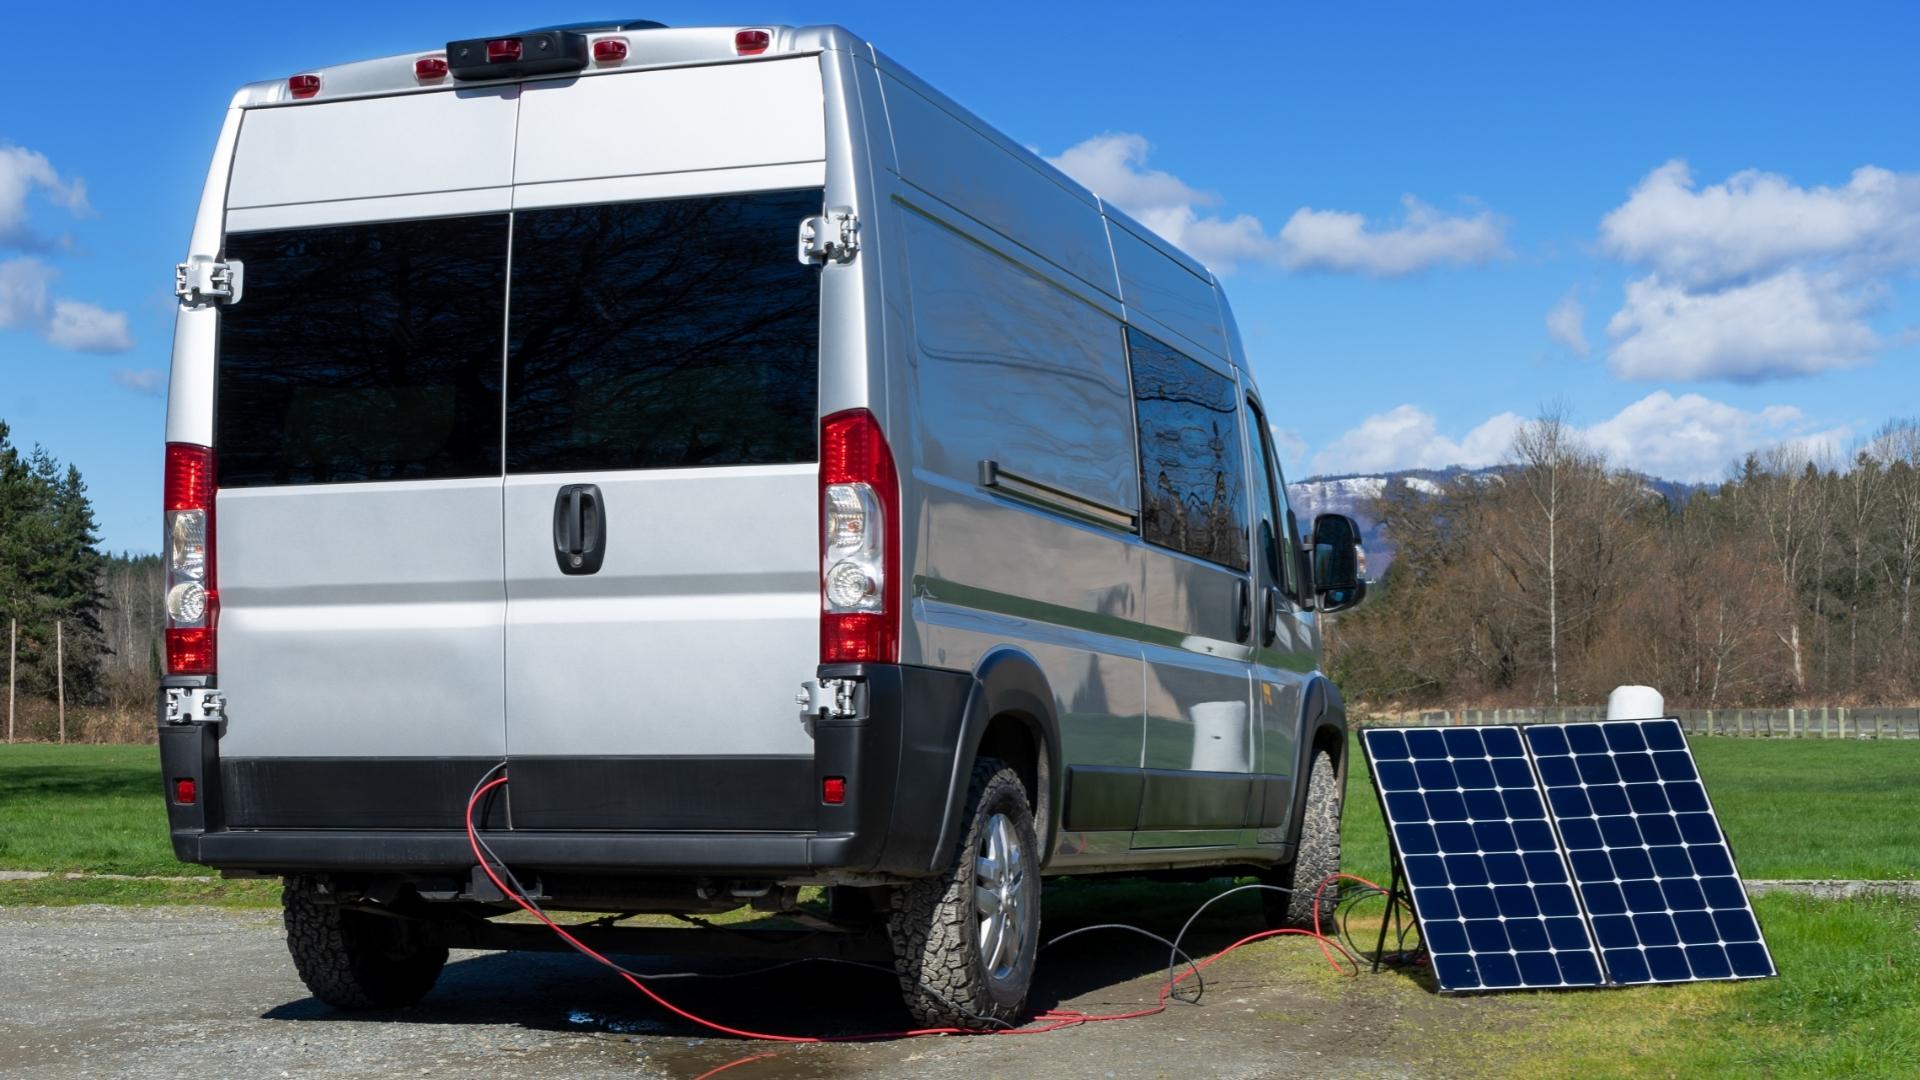 A solar panel set outside in the sun to power an RV